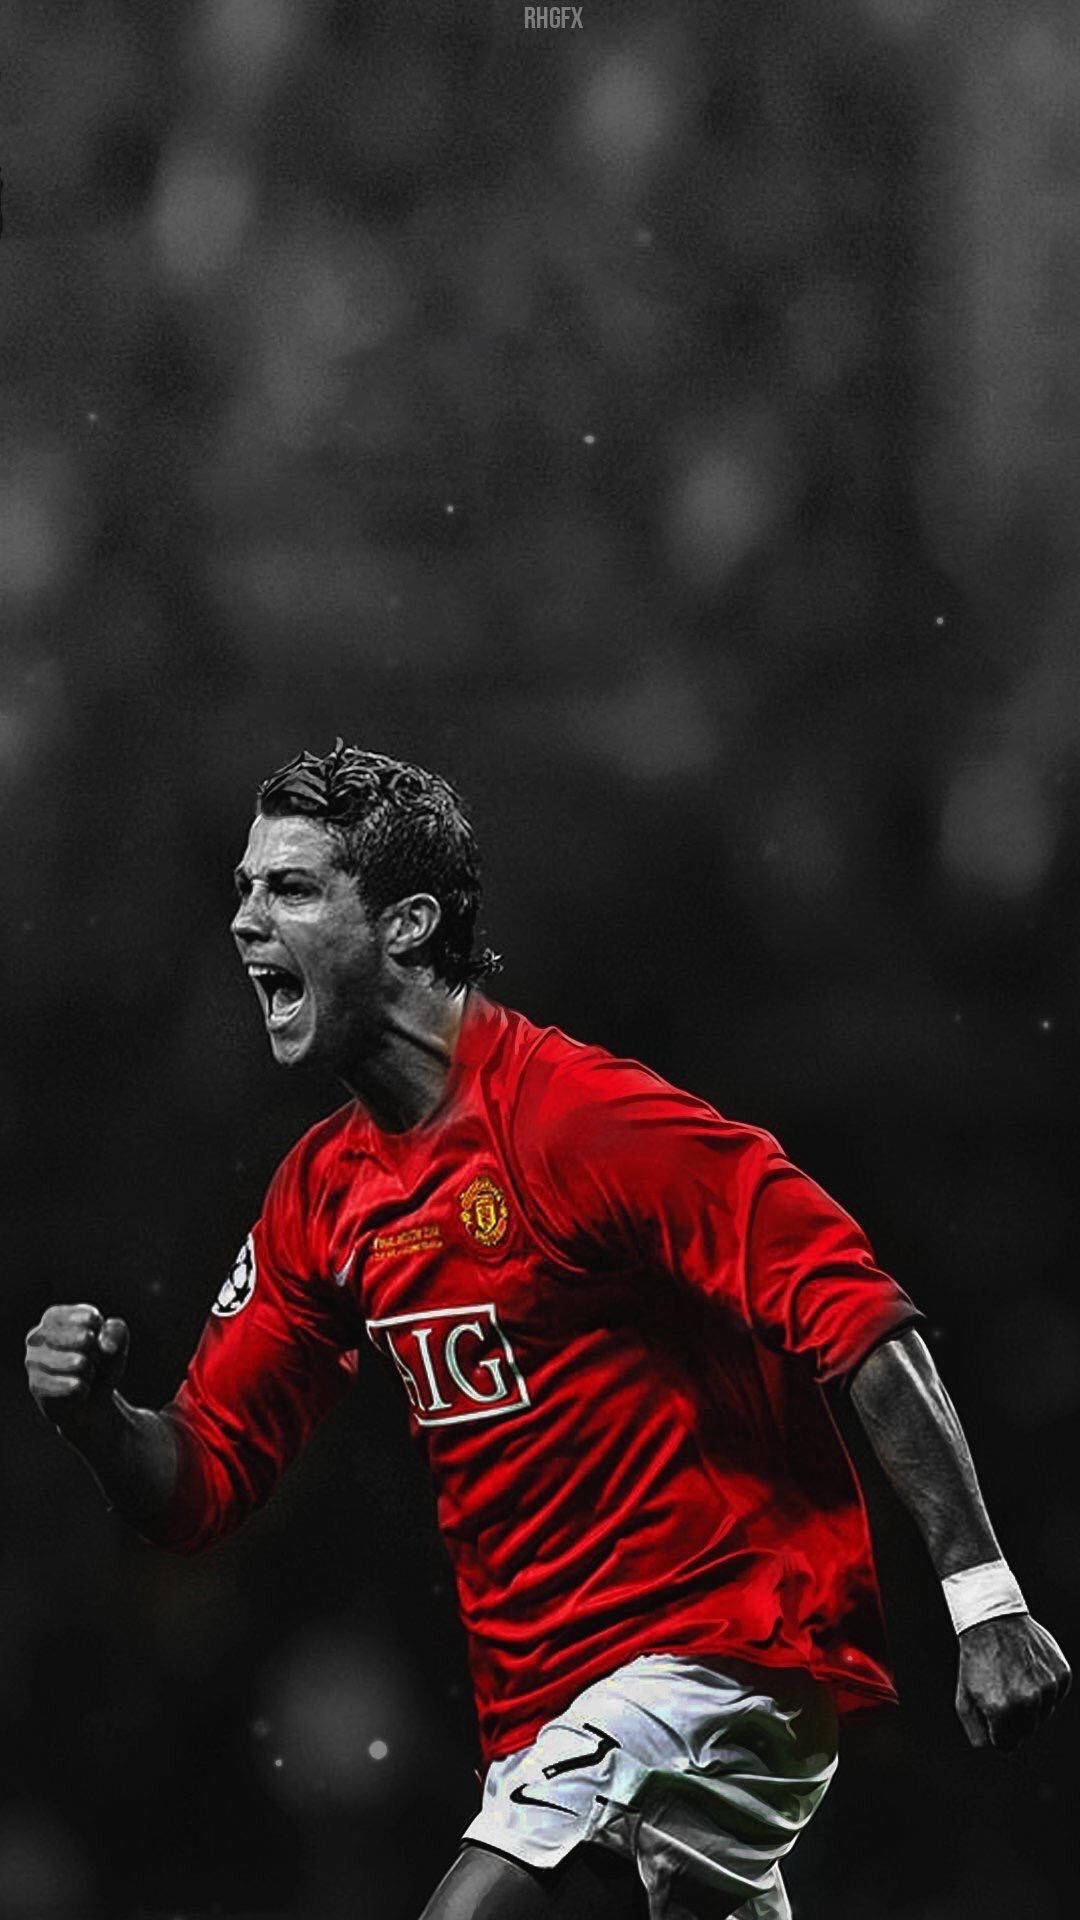 Cristiano Ronaldo Manchester United Wallpaper iPhone with image resolution 1080x1920 pixel. You can make this wallpaper for your iPhone 5, 6, 7, 8, X backgrounds, Mobile Screensaver, or iPad Lock Screen - Cristiano Ronaldo